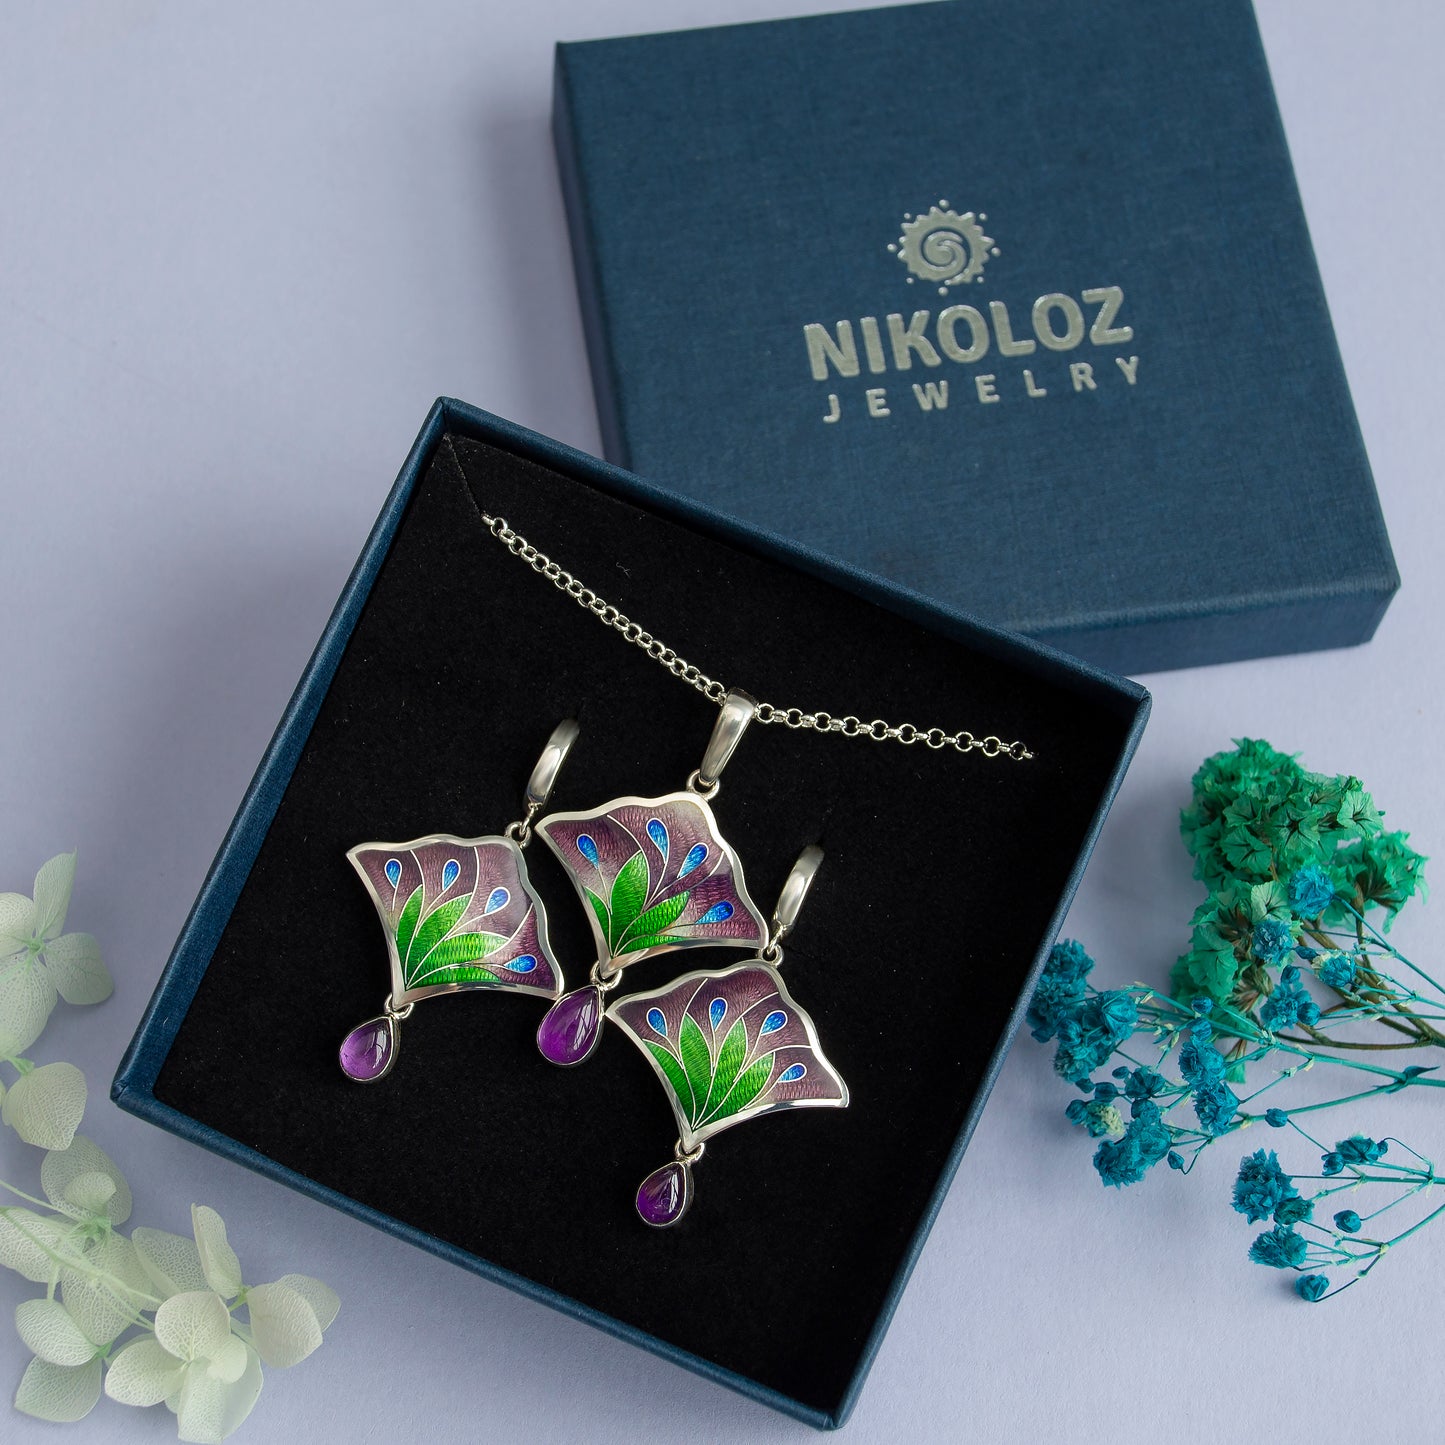 Flower Bouquet Jewelry Set, Cloisonne Enamel Silver Earrings And Necklace With Amethyst